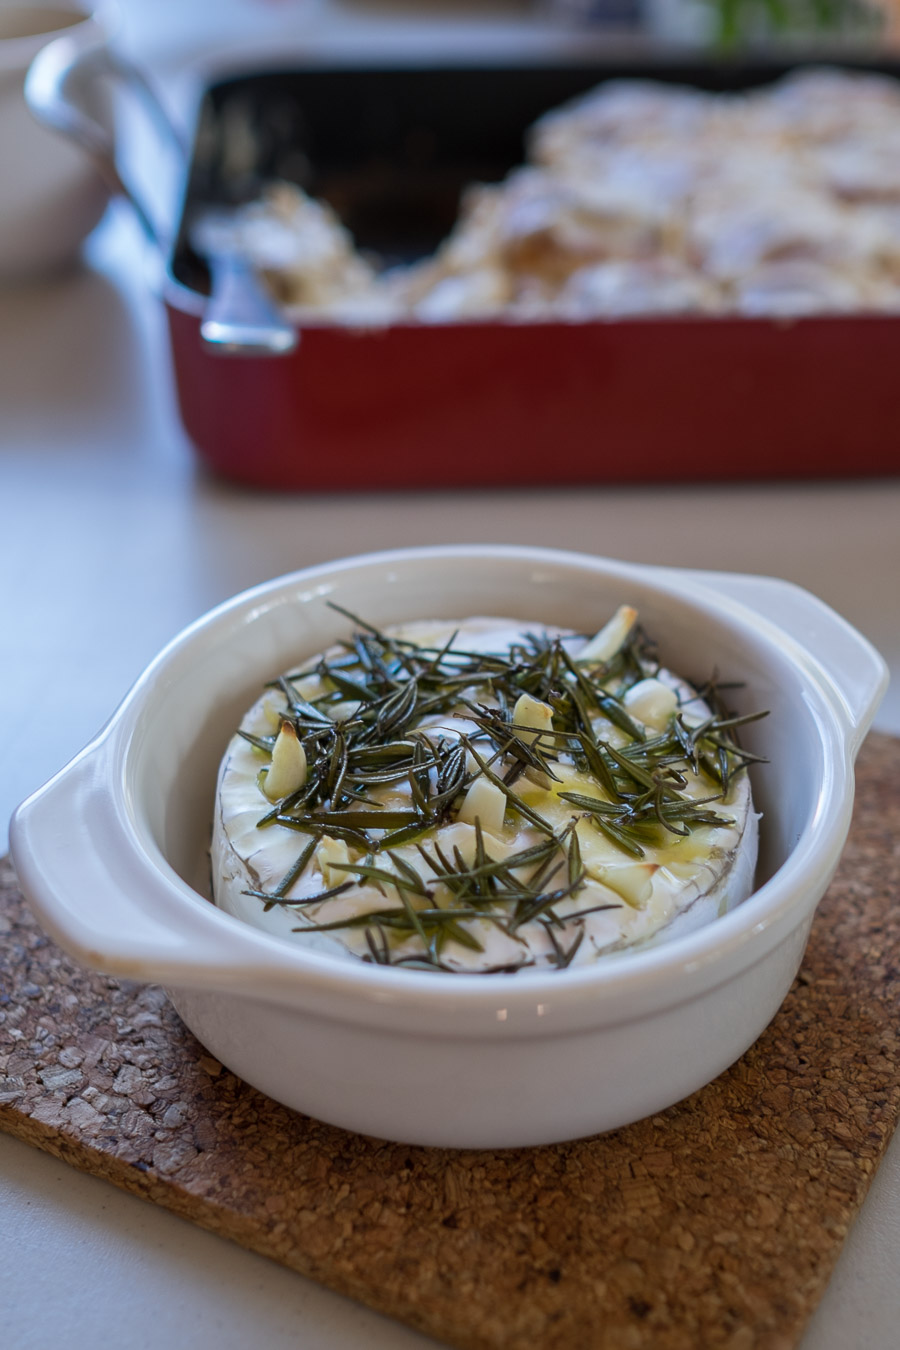 Camembert with rosemary, garlic and olive oil, ready for dipping.